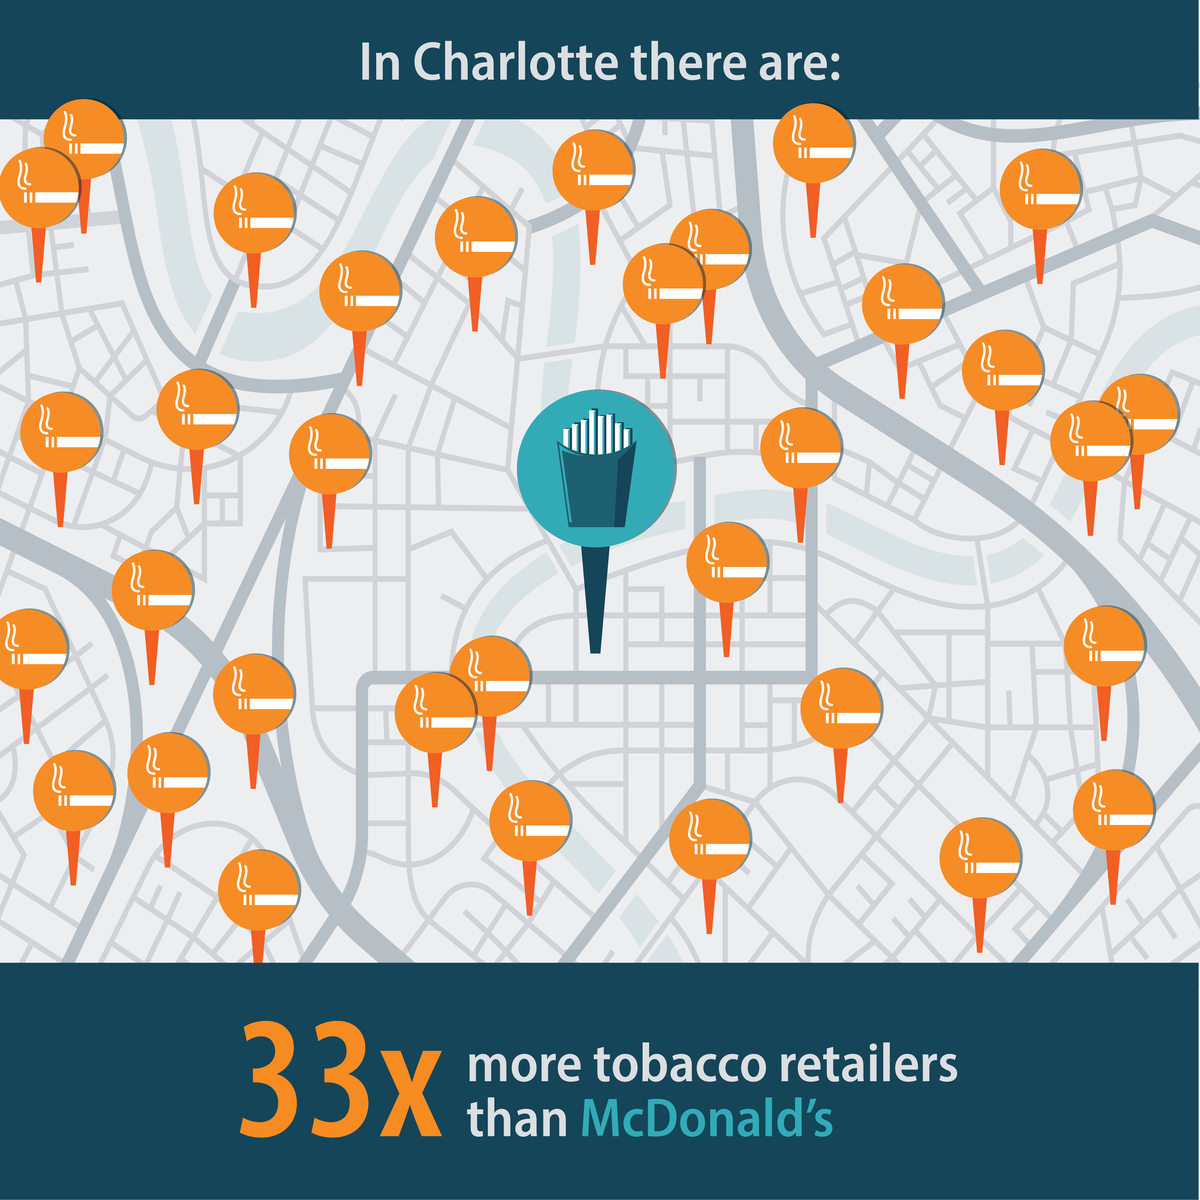 In Charlotte there are: 33 times more tobacco retailers than McDonald's